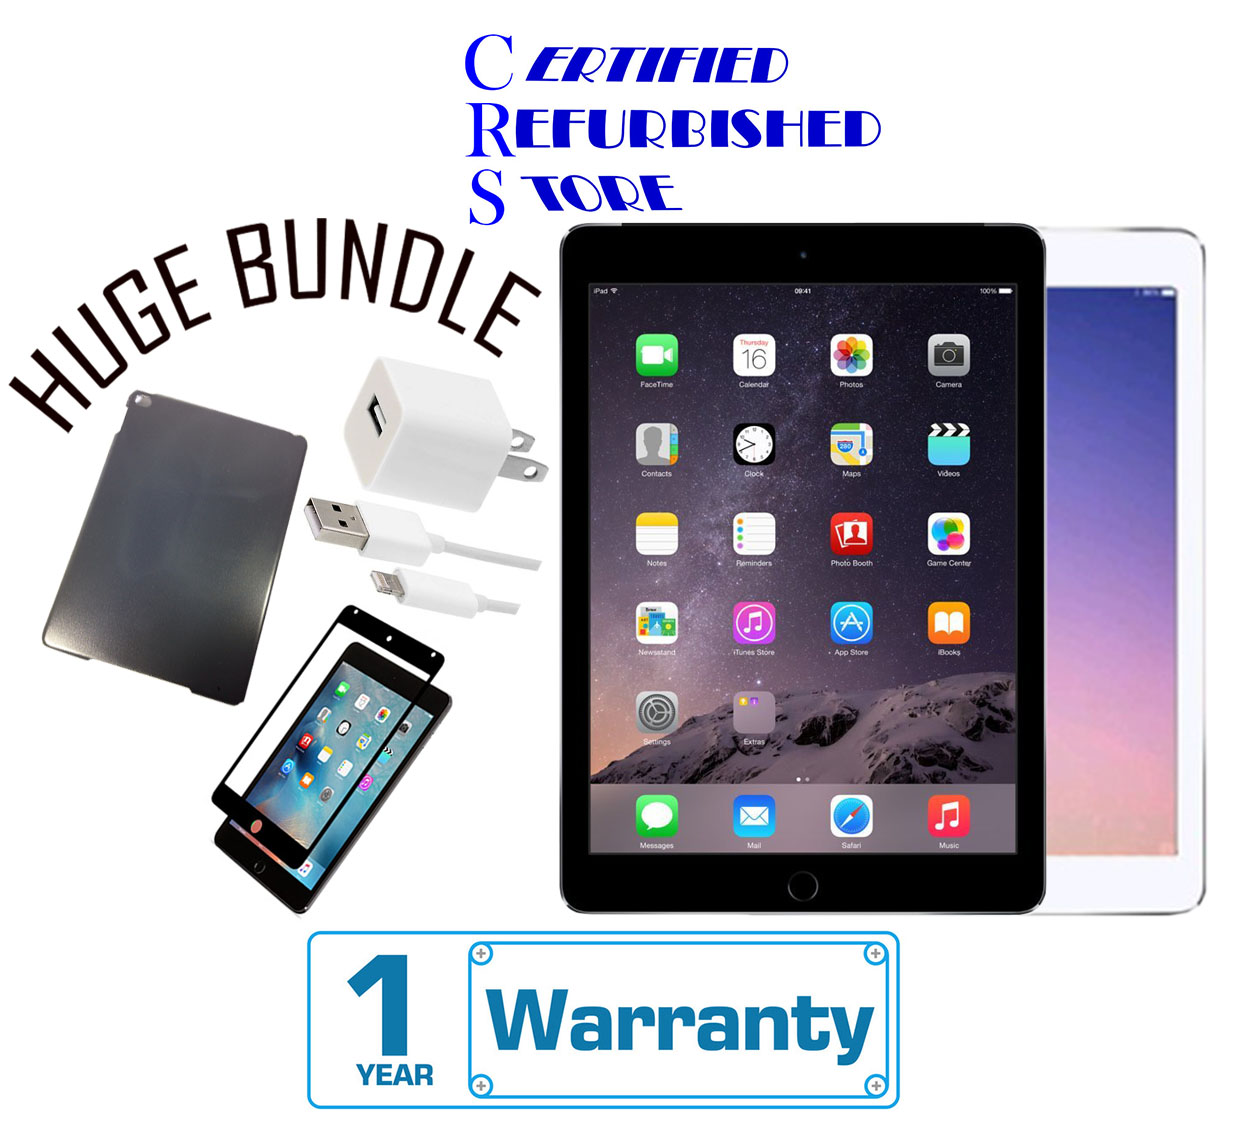 Apple iPad Air 2 16GB,32GB,64GB,128GB - Wifi + 4G AT&T -(Certified Open Box) with 1-Year Warranty - image 1 of 1